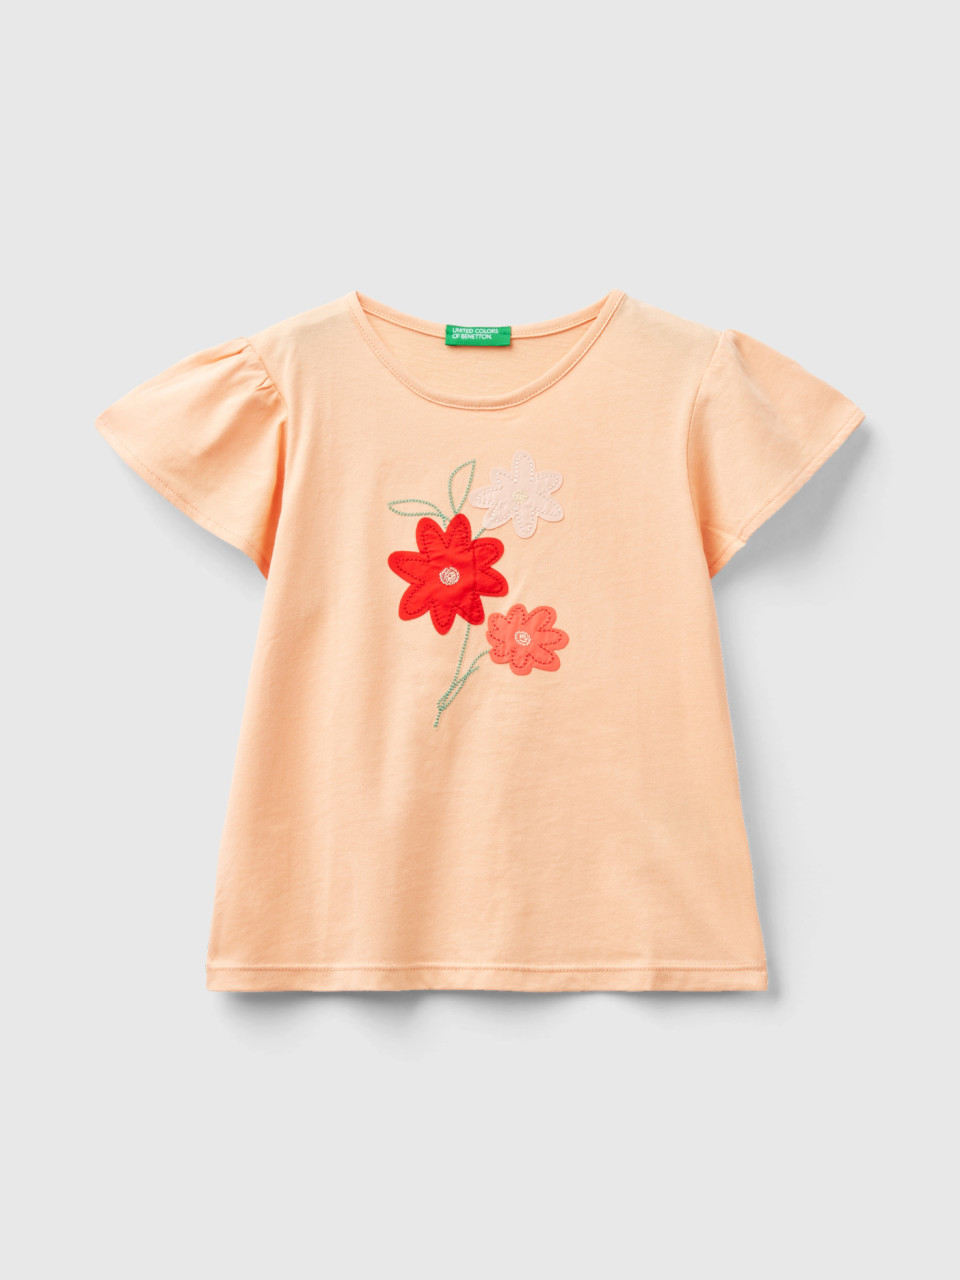 Benetton, T-shirt With Floral Embroidery, Peach, Kids